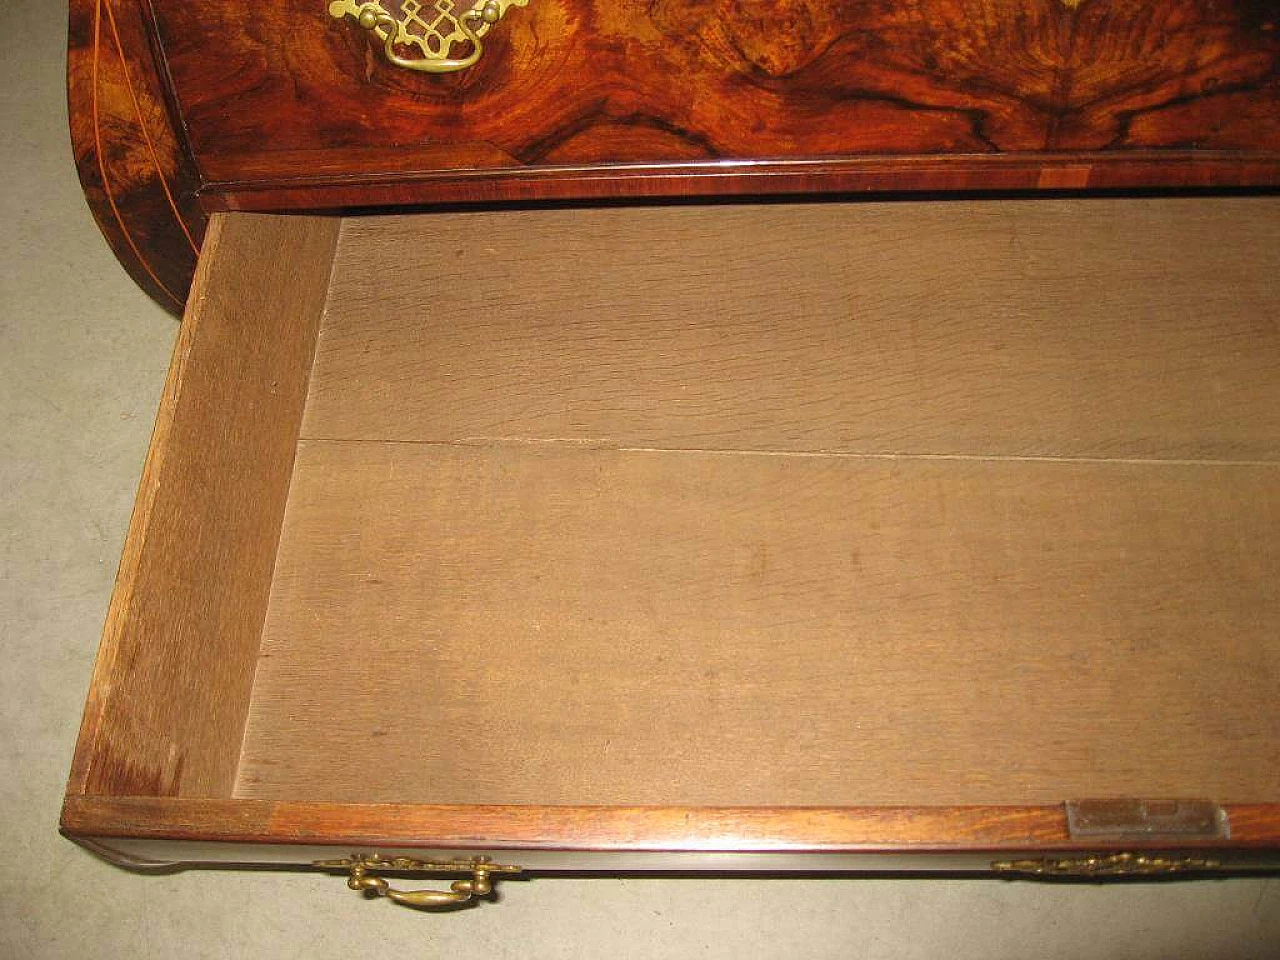 English folding table with riser, early 1800s 1210195